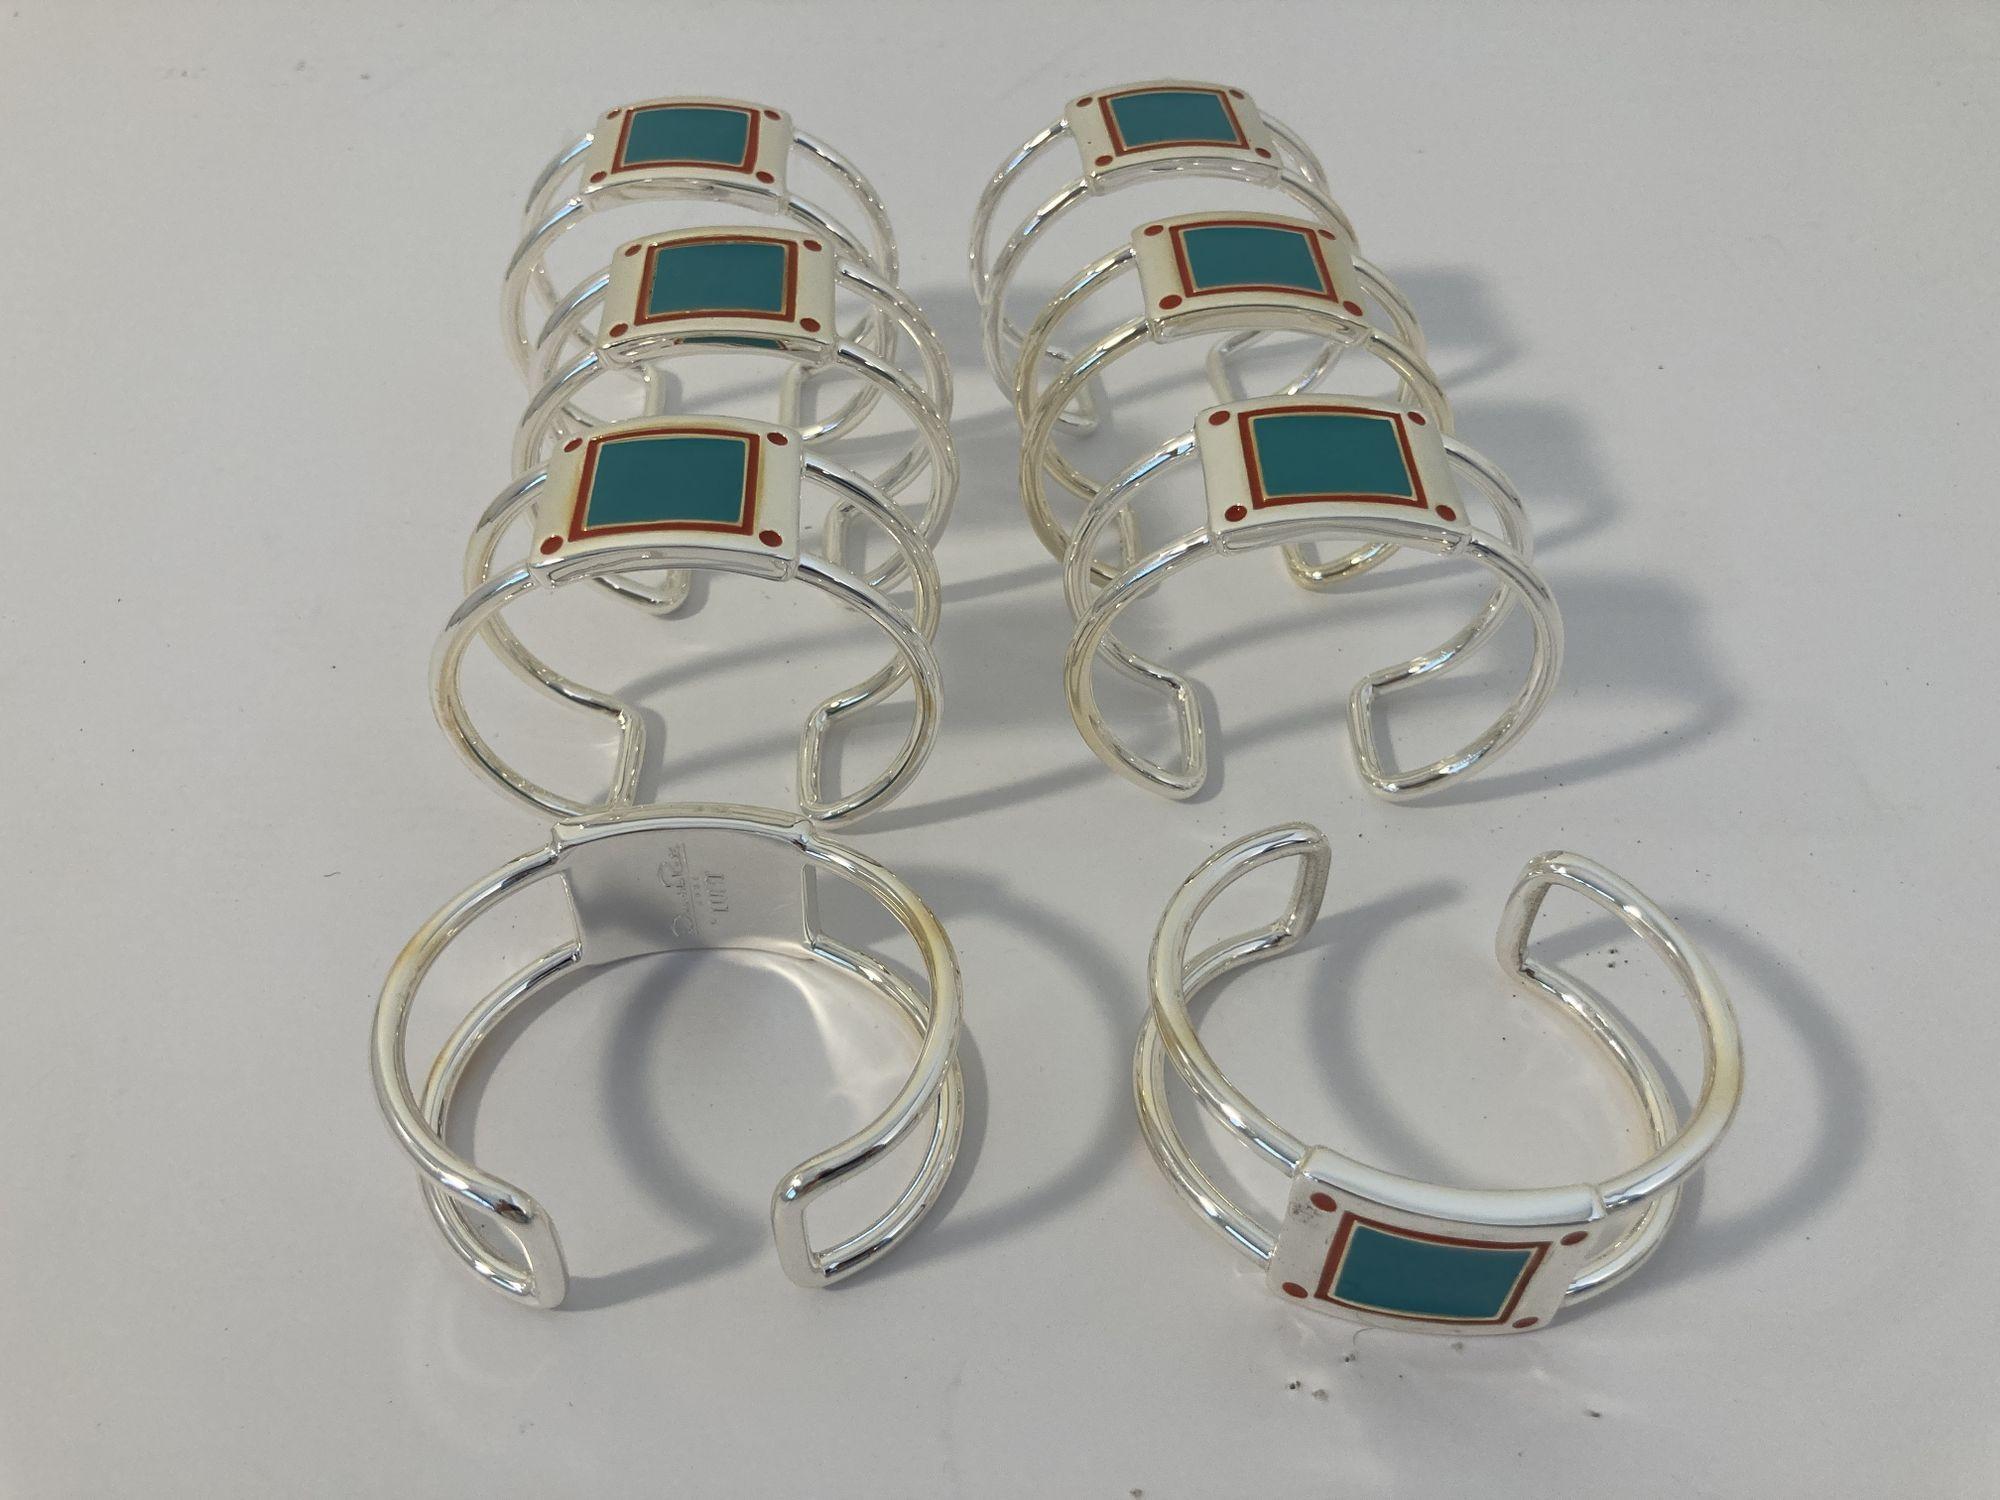 Oscar De La Renta Home Napkin Rings for Lunt Set of 8 In Good Condition For Sale In North Hollywood, CA